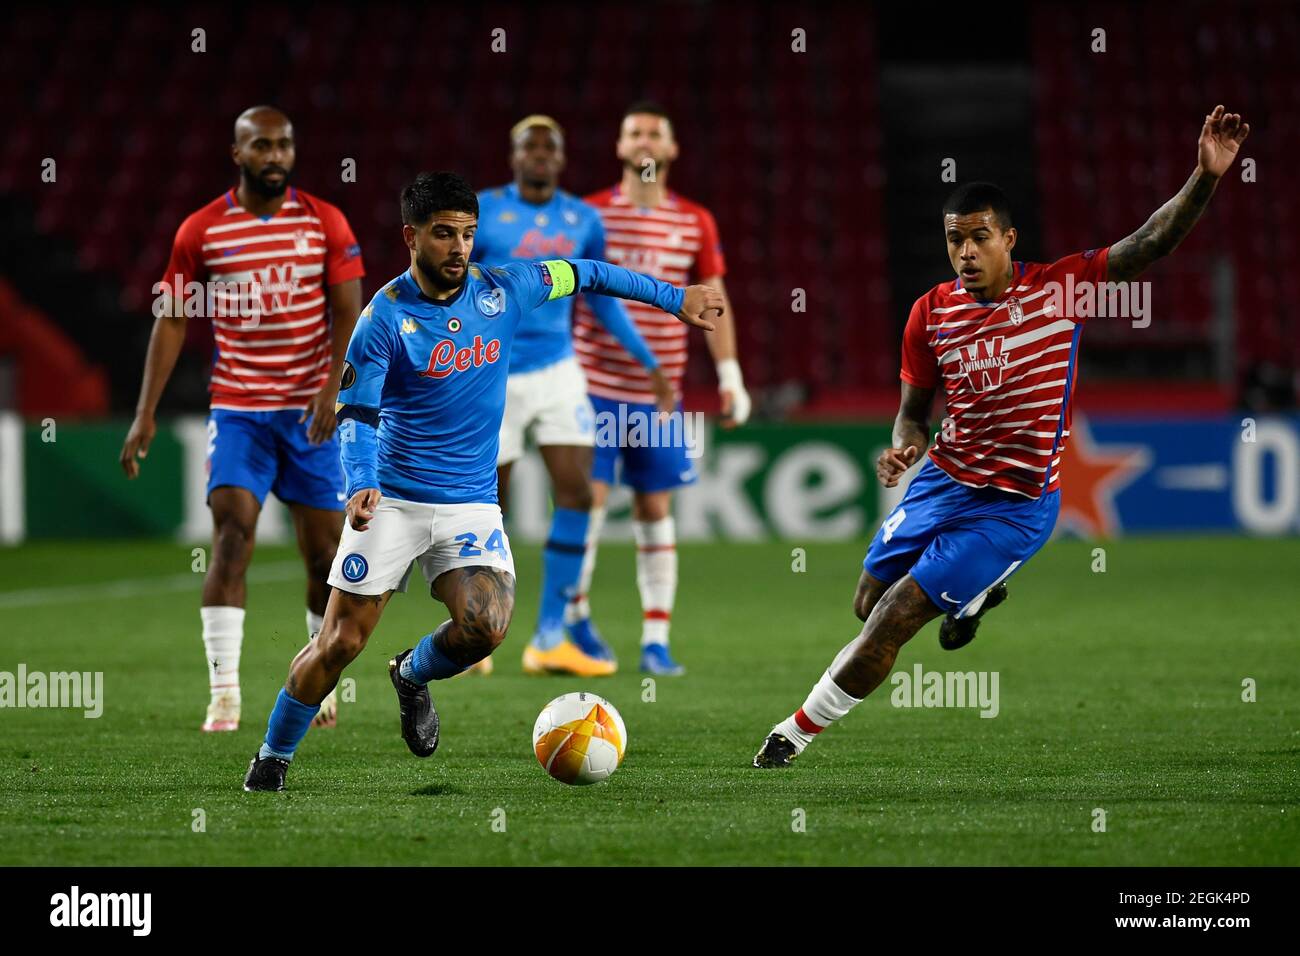 SSC Napoli Lorenzo Insigne and Granda CF player Robert Kenedy are seen in action during the Uefa Europa League round of 16 match between Granada CF and SSC Napoli at Nuevo Los Carmenes Stadium. Stock Photo